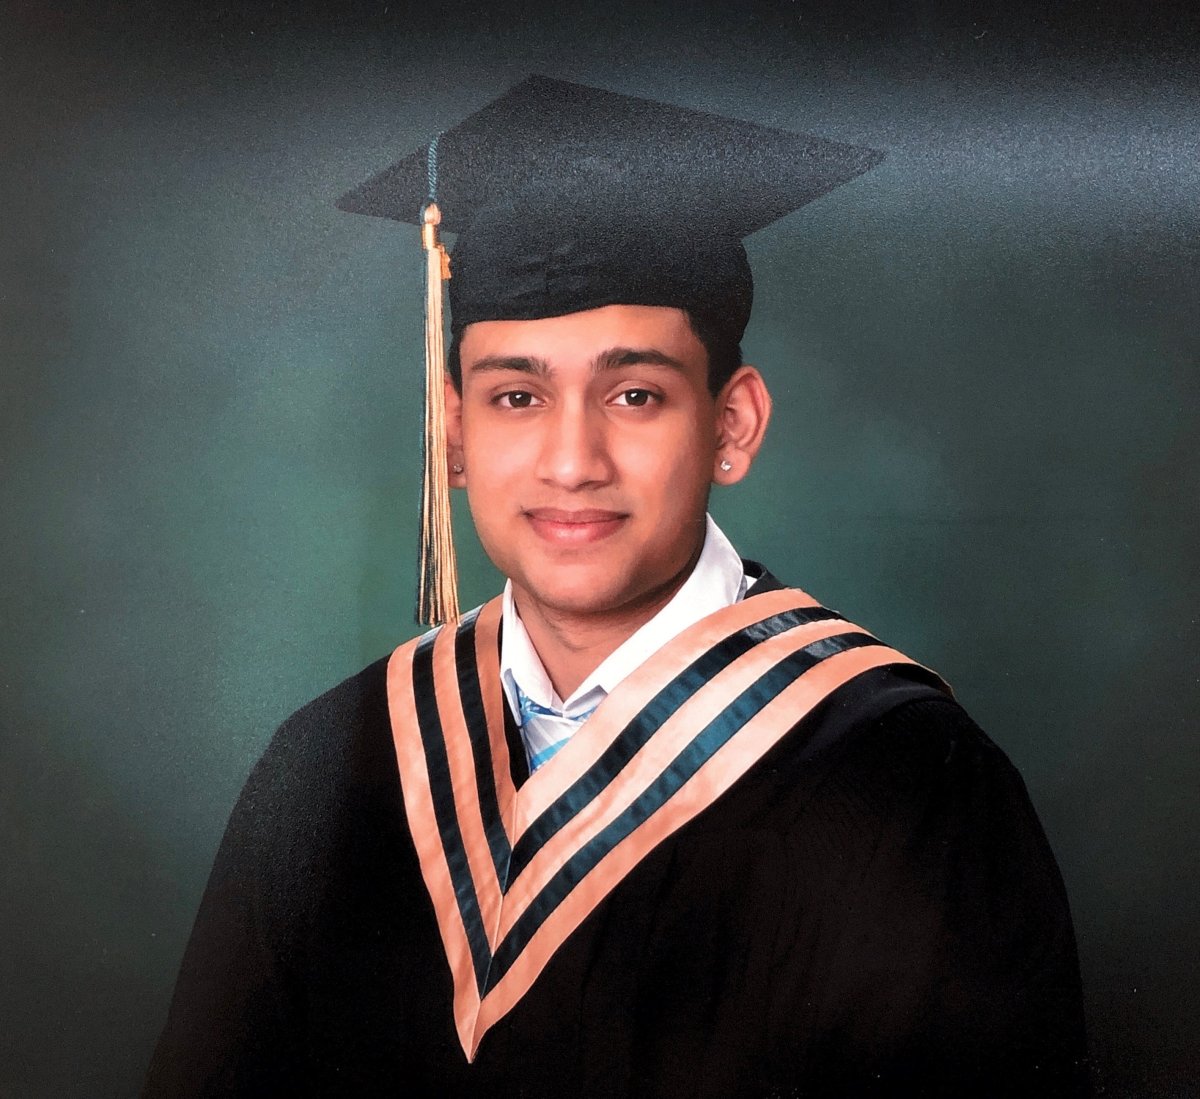 Aarsh Shah is the first student from Regina's Campbell Collegiate to be awarded the prestigious STEM scholarship from The Schulich Foundation. 